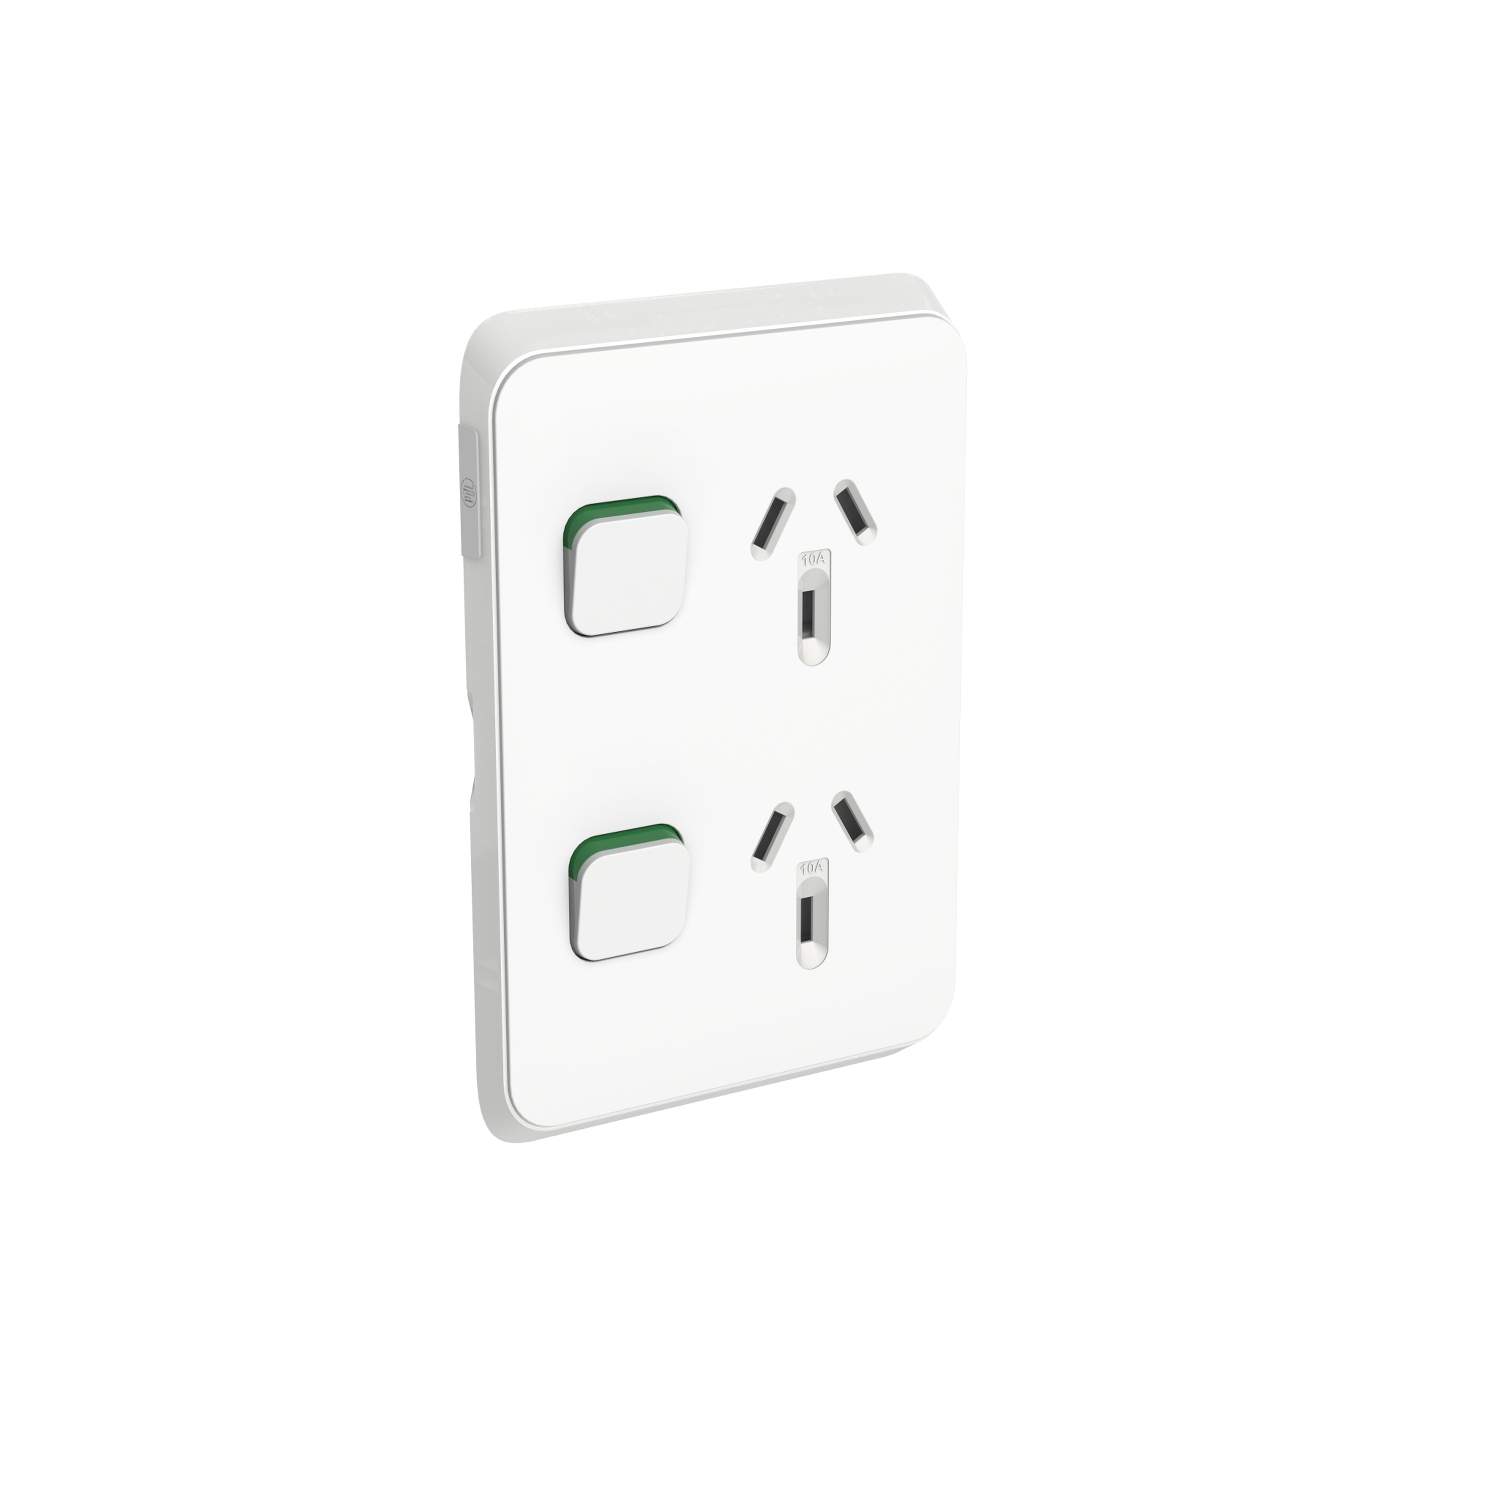 PDL392C-VW - PDL Iconic Cover Plate Double Switched Socket Vertical 10Amp - Vivid White